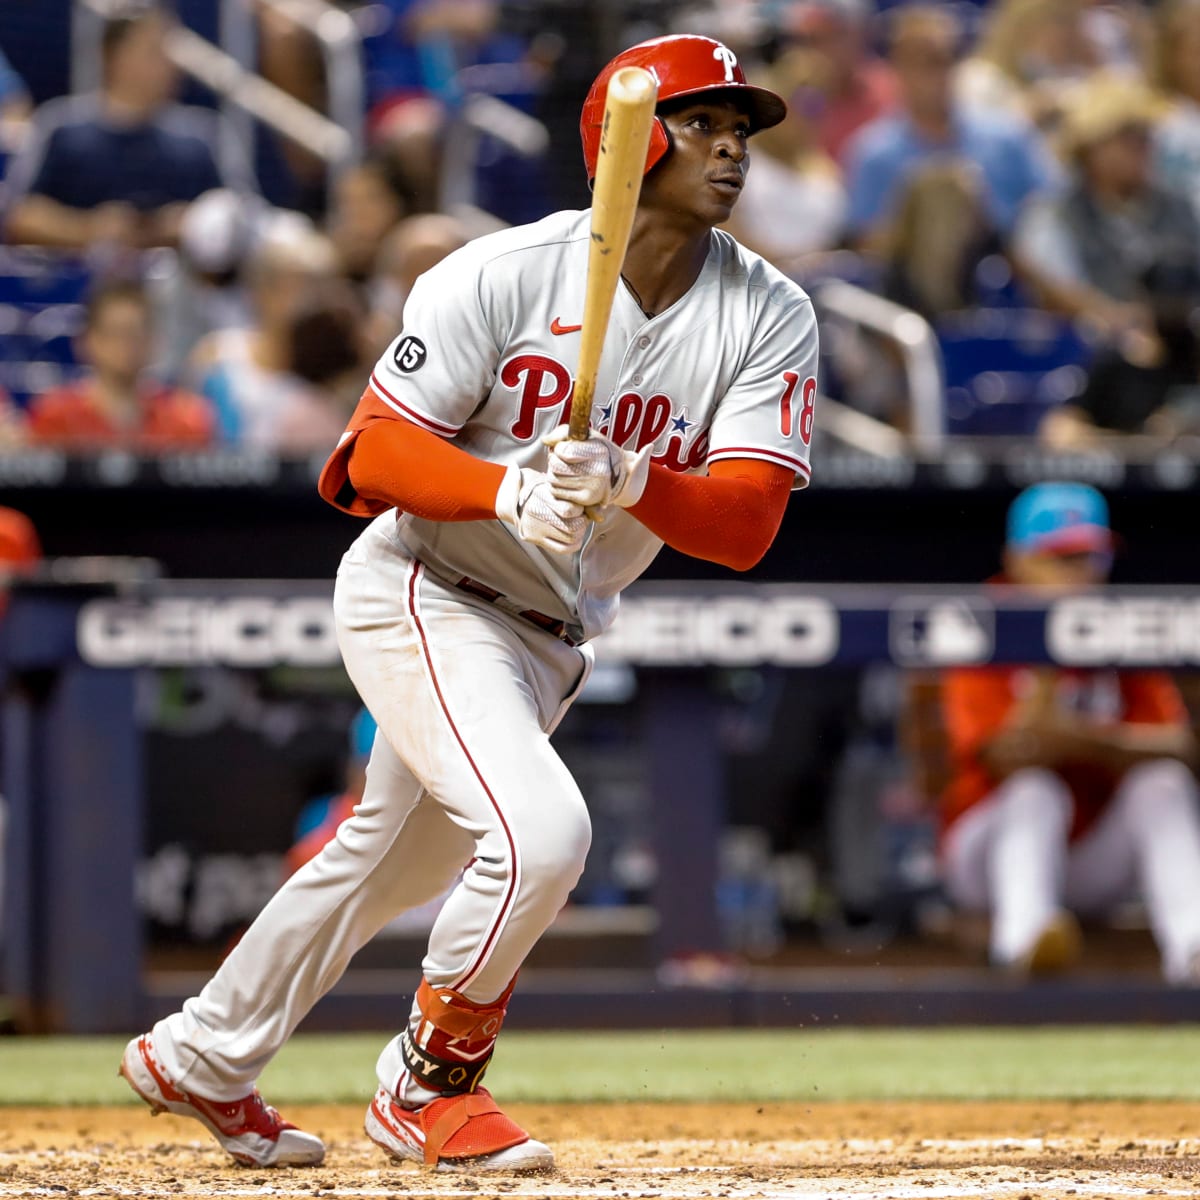 Philadelphia Phillies' Didi Gregorius is a power bat and the most